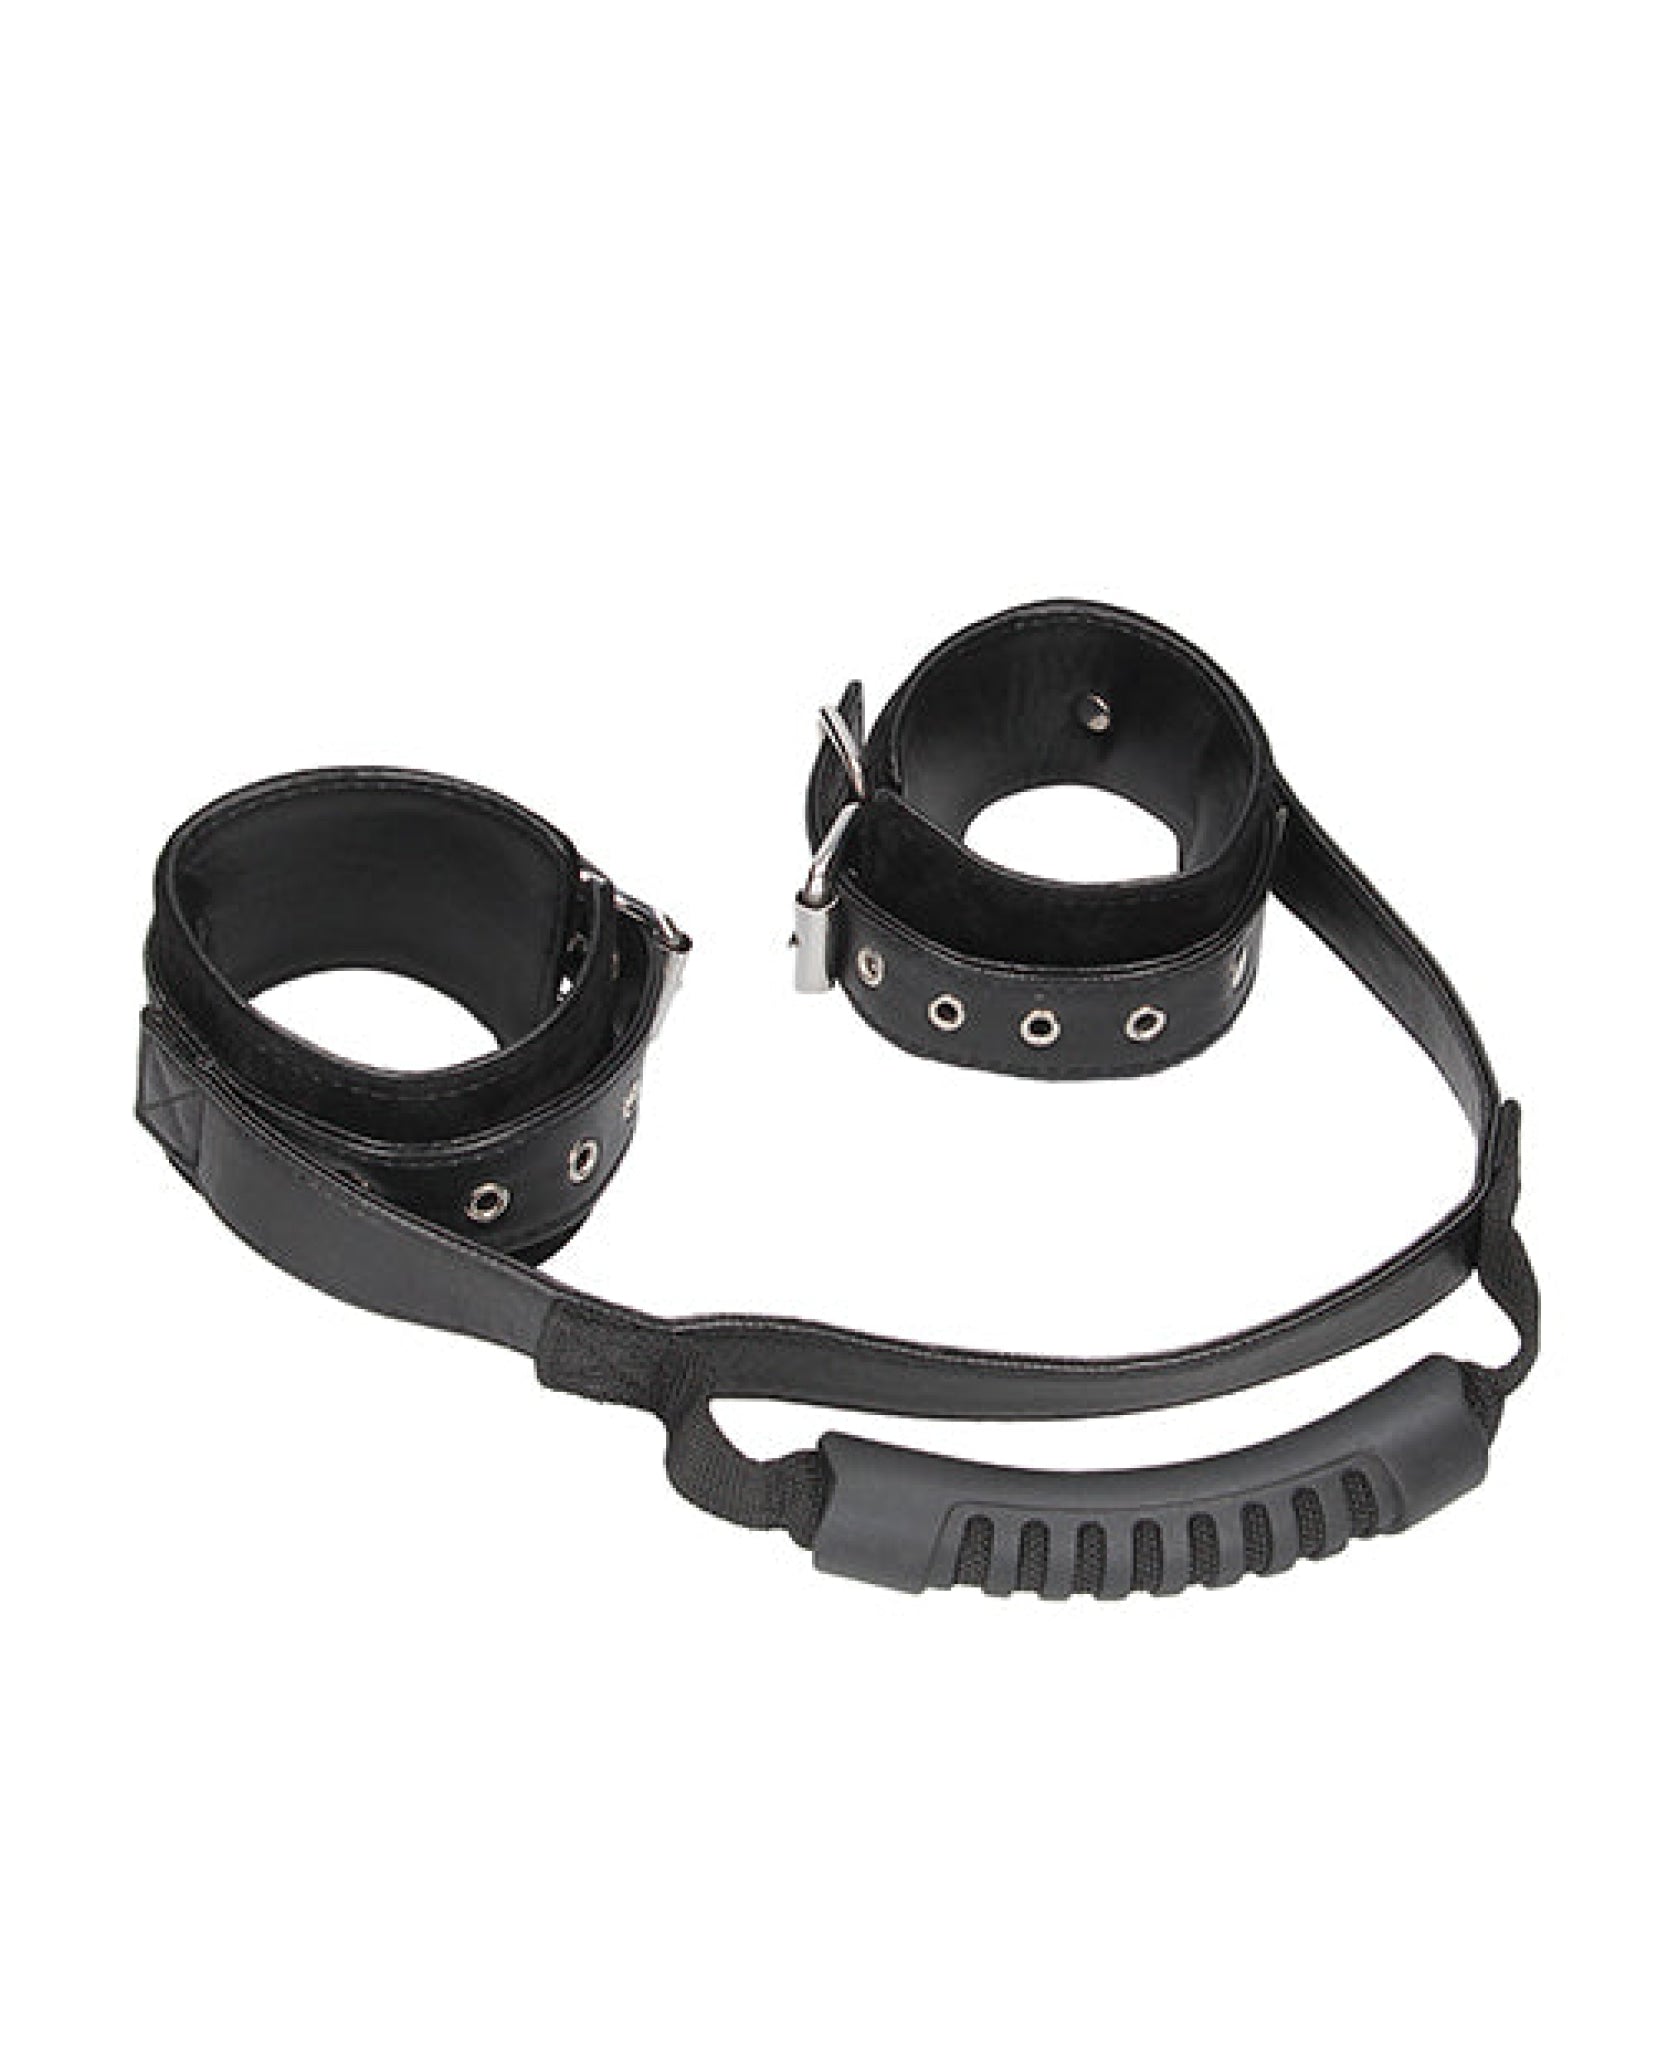 Shots Ouch Black & White Bonded Leather Hand Cuffs W-handle - Black Shots